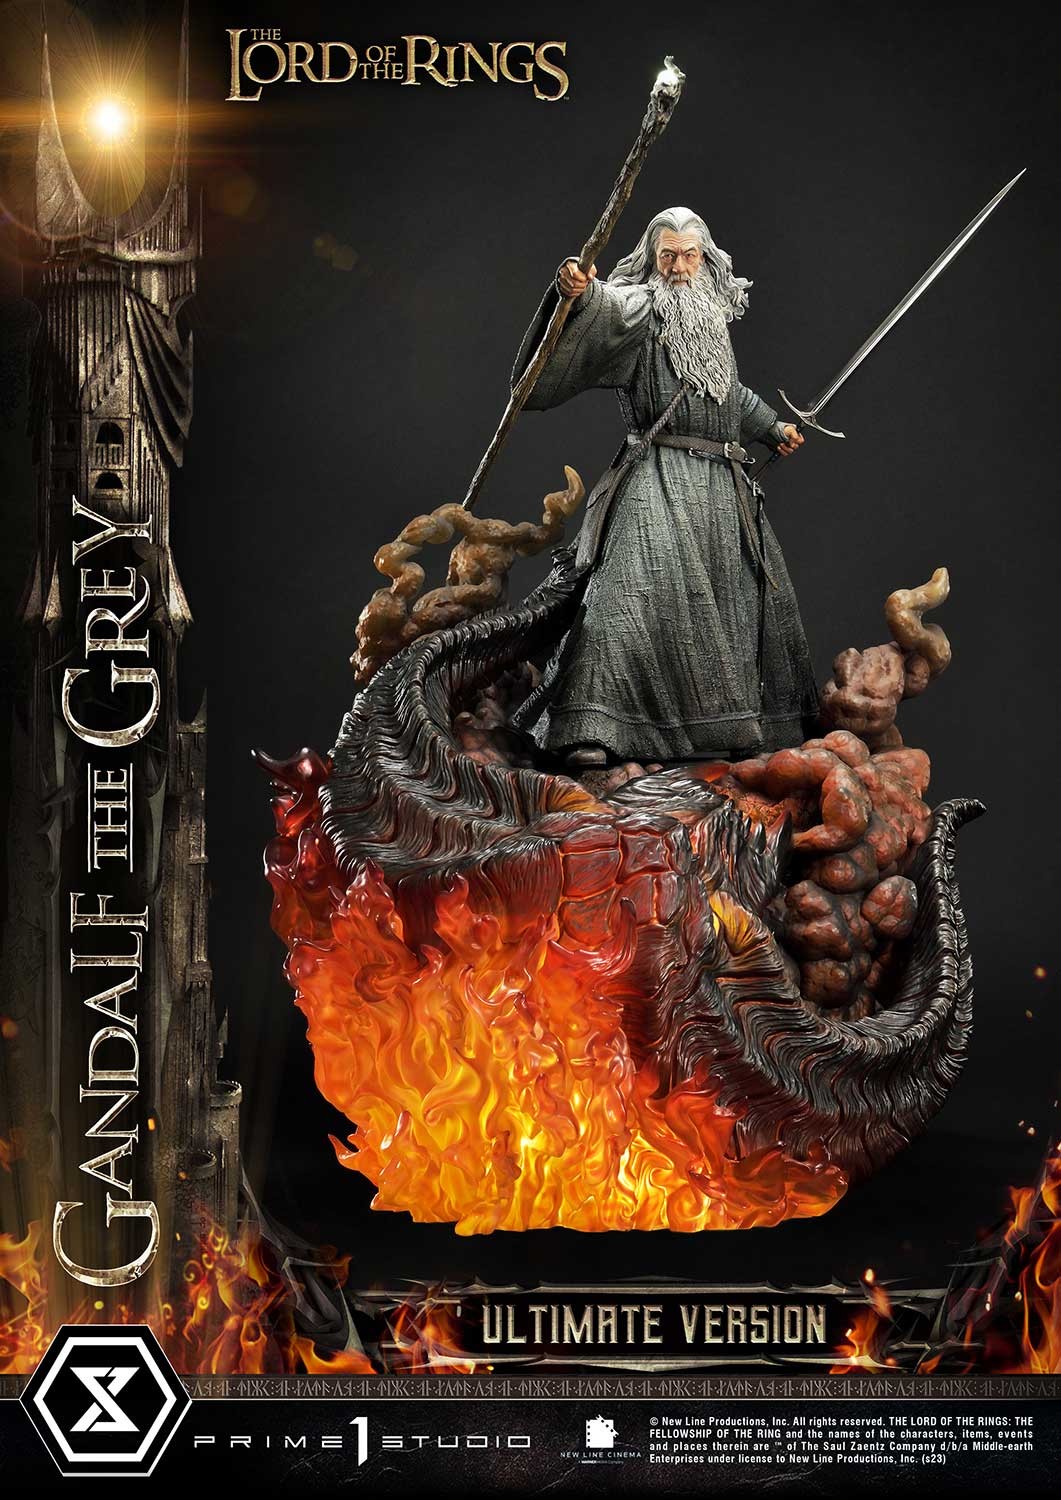 GANDALF THE GREY 1/4 Scale Statue Gandalf-the-grey-ultimate-version_the-lord-of-the-rings_gallery_64c425baf01f2